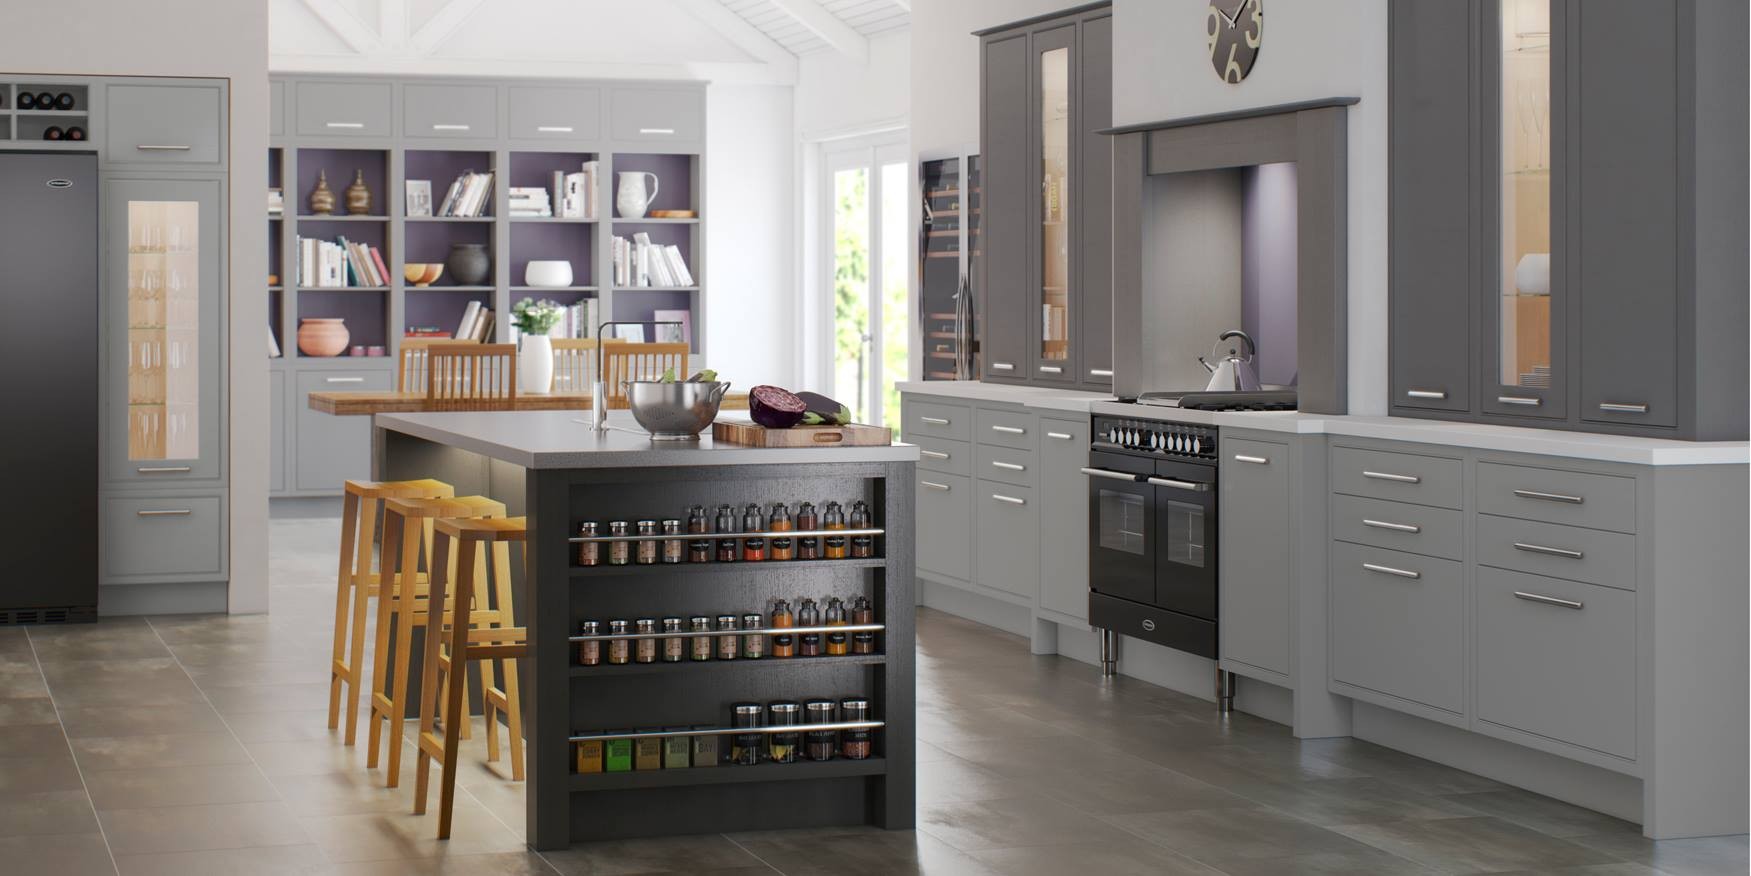 Harrisons Kitchens And Bedrooms Linkedin